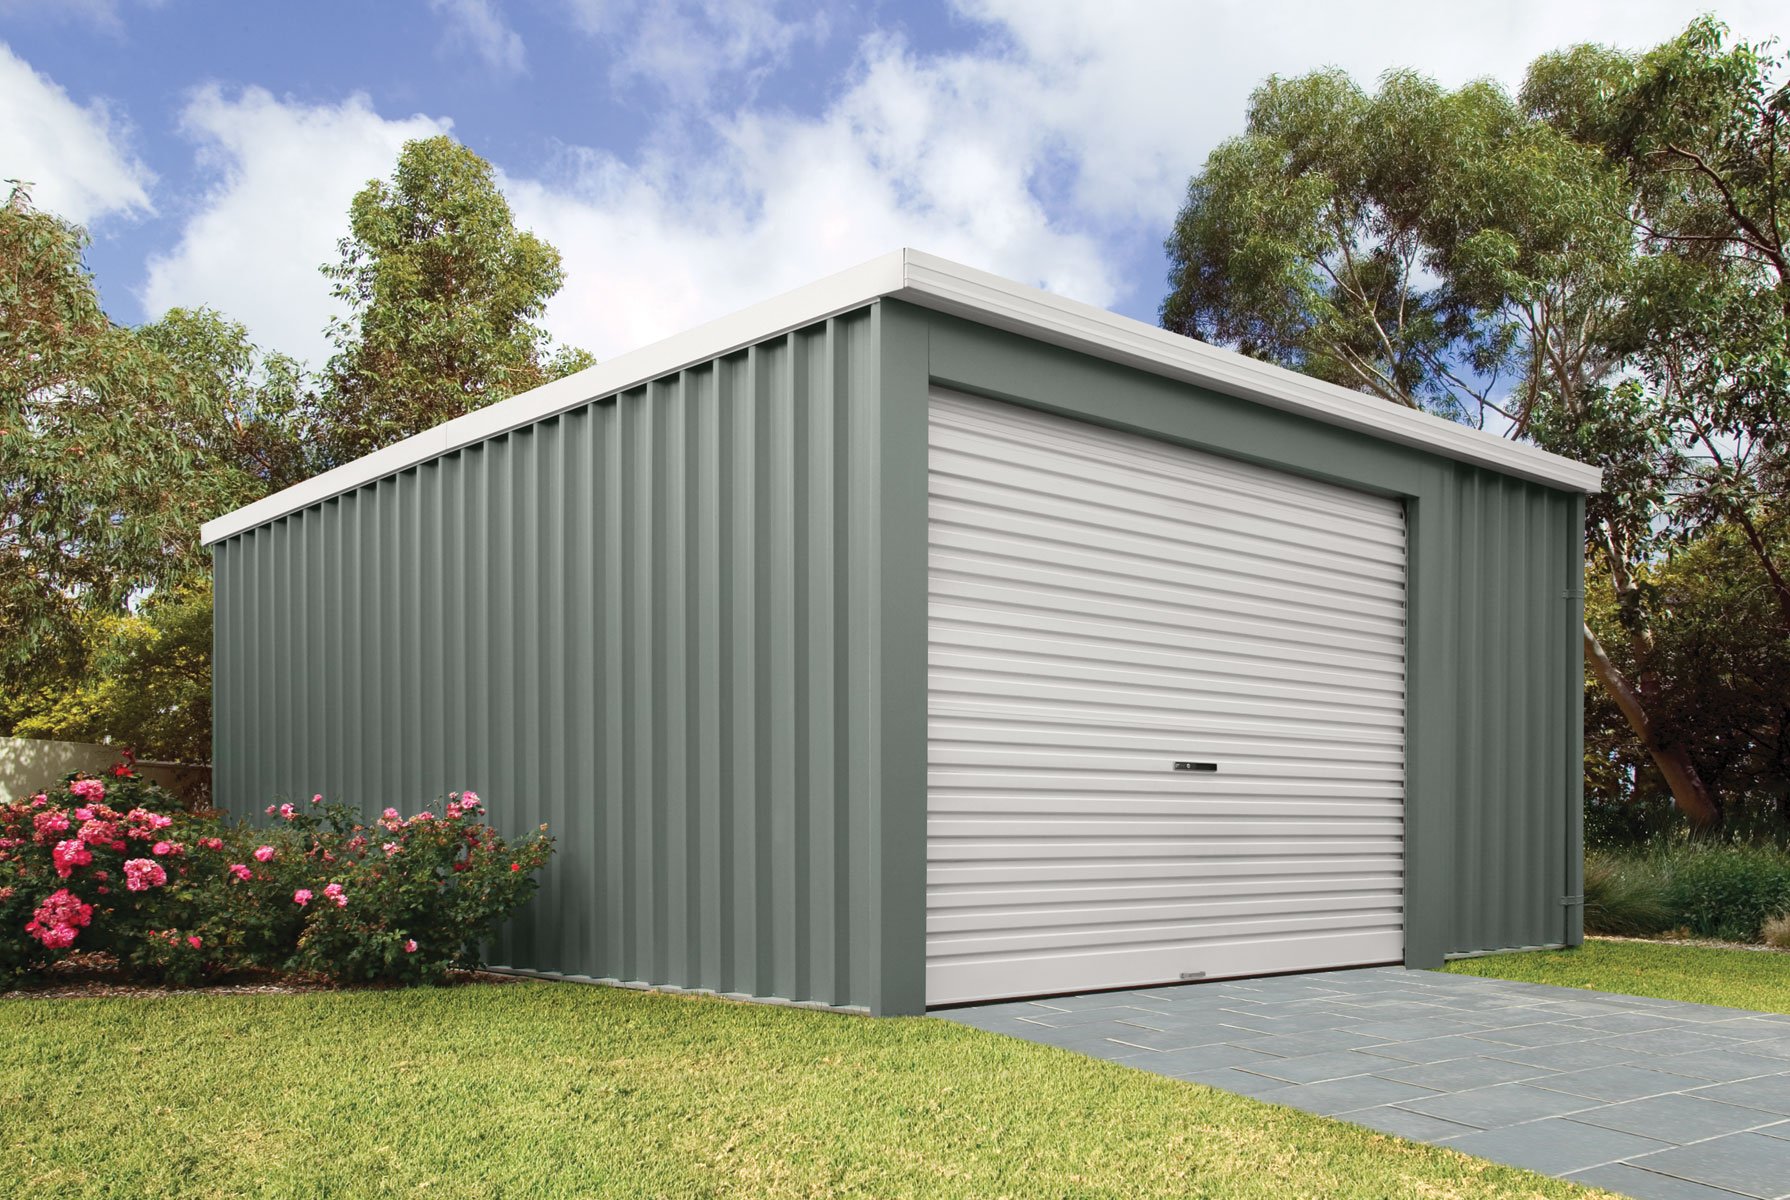 How To Build A Metal Storage Shed